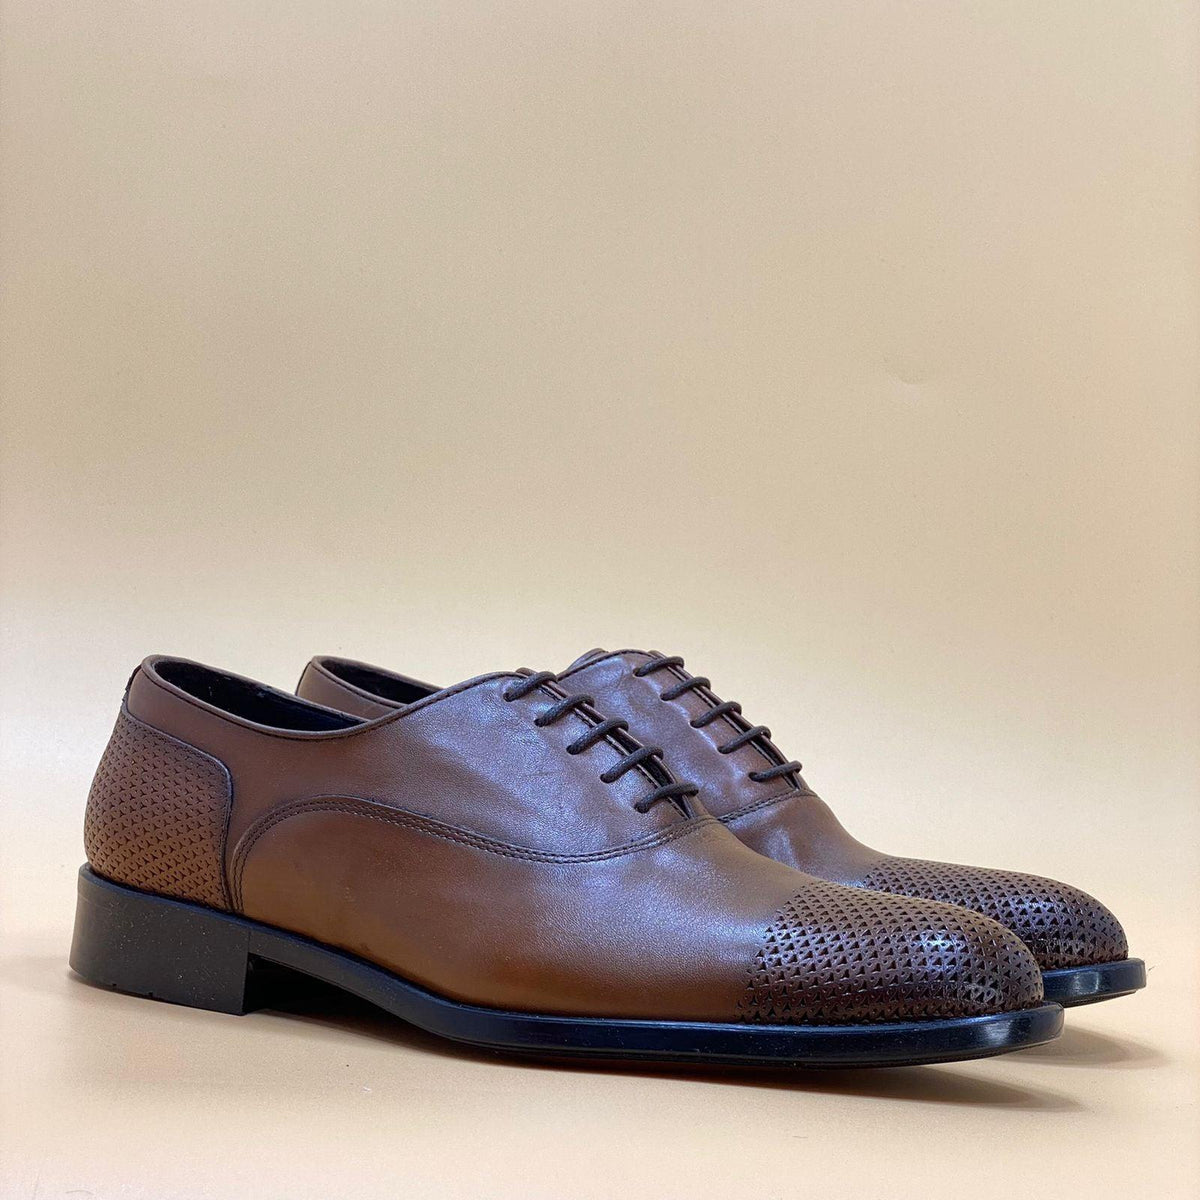 MADE IN TURKEY GENUINE LEATHER MEN SHOES M852 - Olive Tree Shoes 